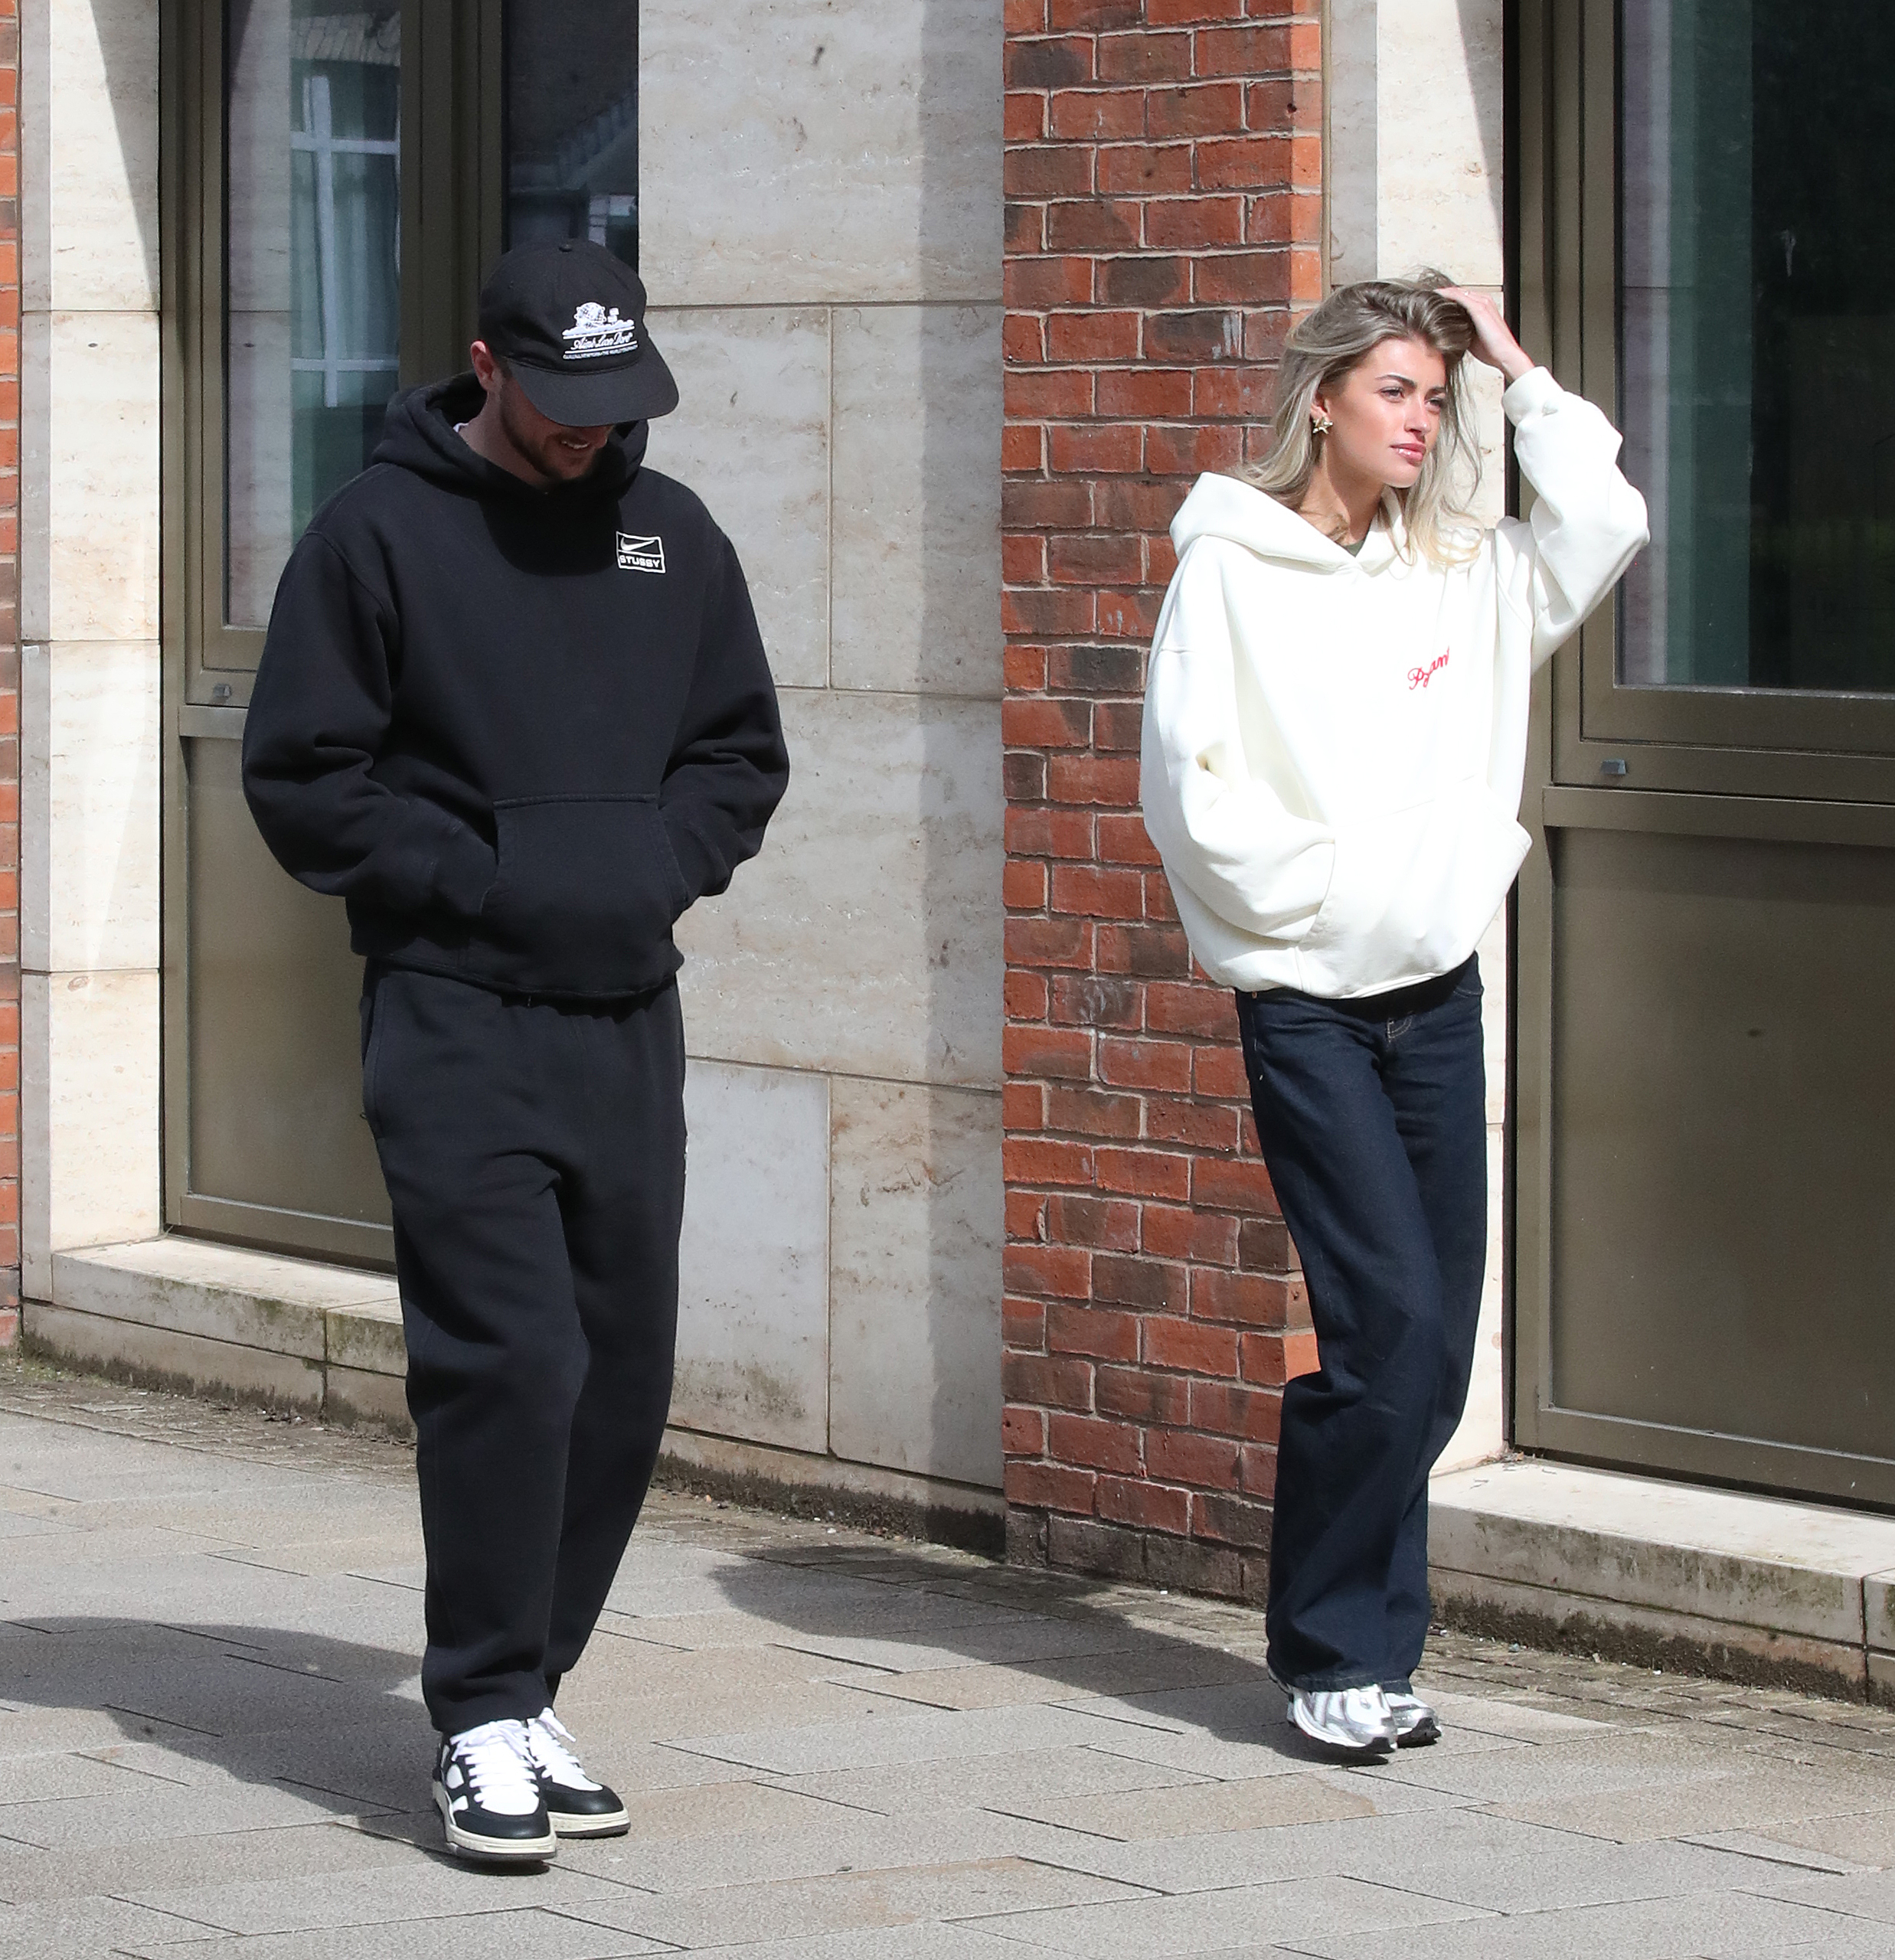 She was spotted strolling with the Manchester United ace in Altrincham